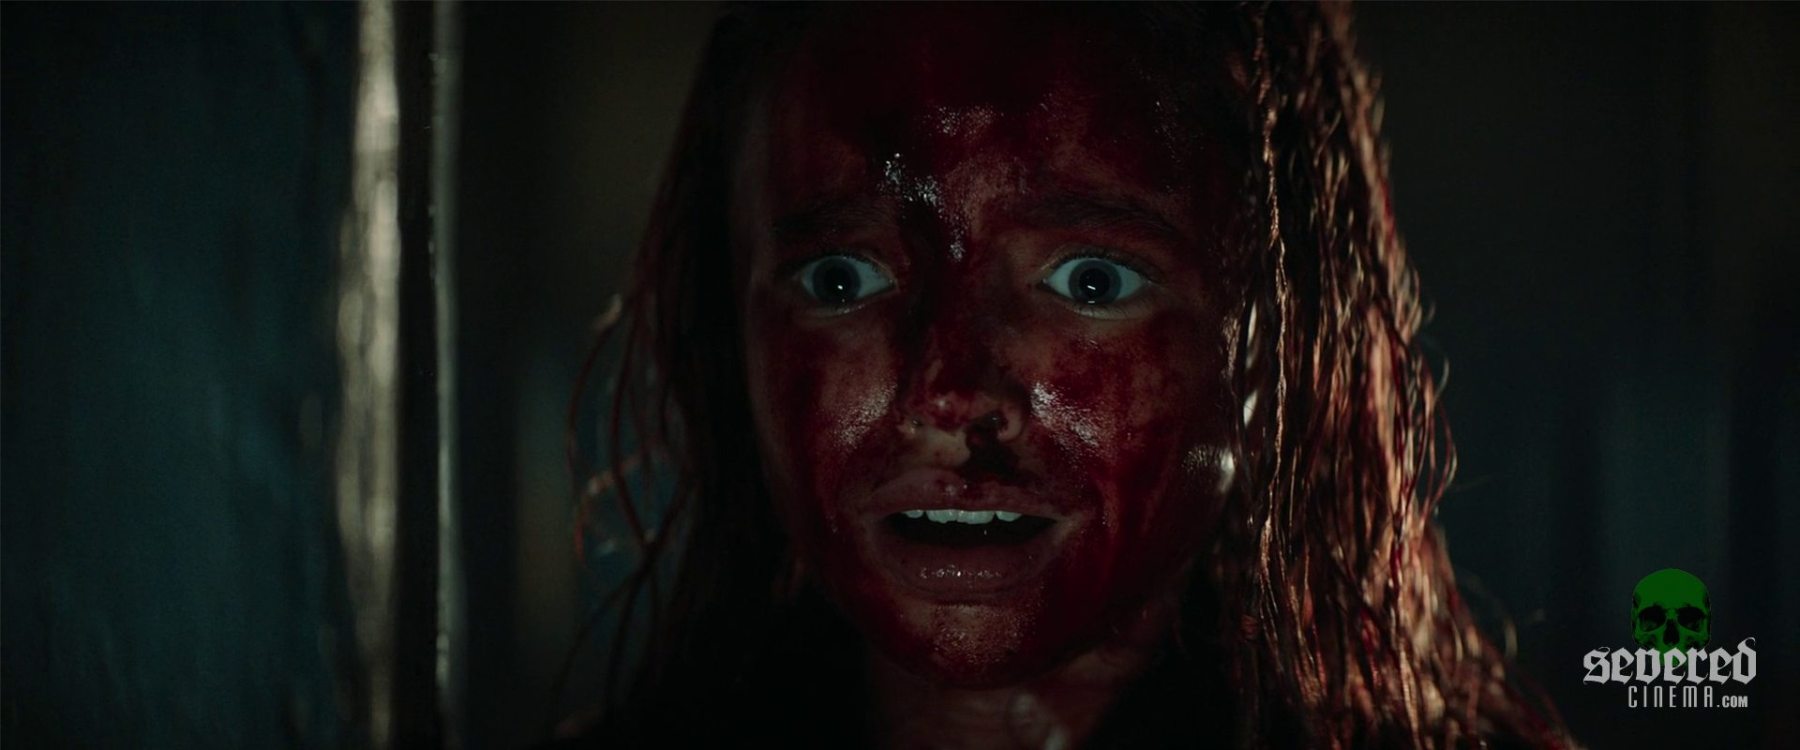 Evil Dead Rise Movie Review: Bloodbath, violence and gore galore in this  engaging horror story- Cinema express